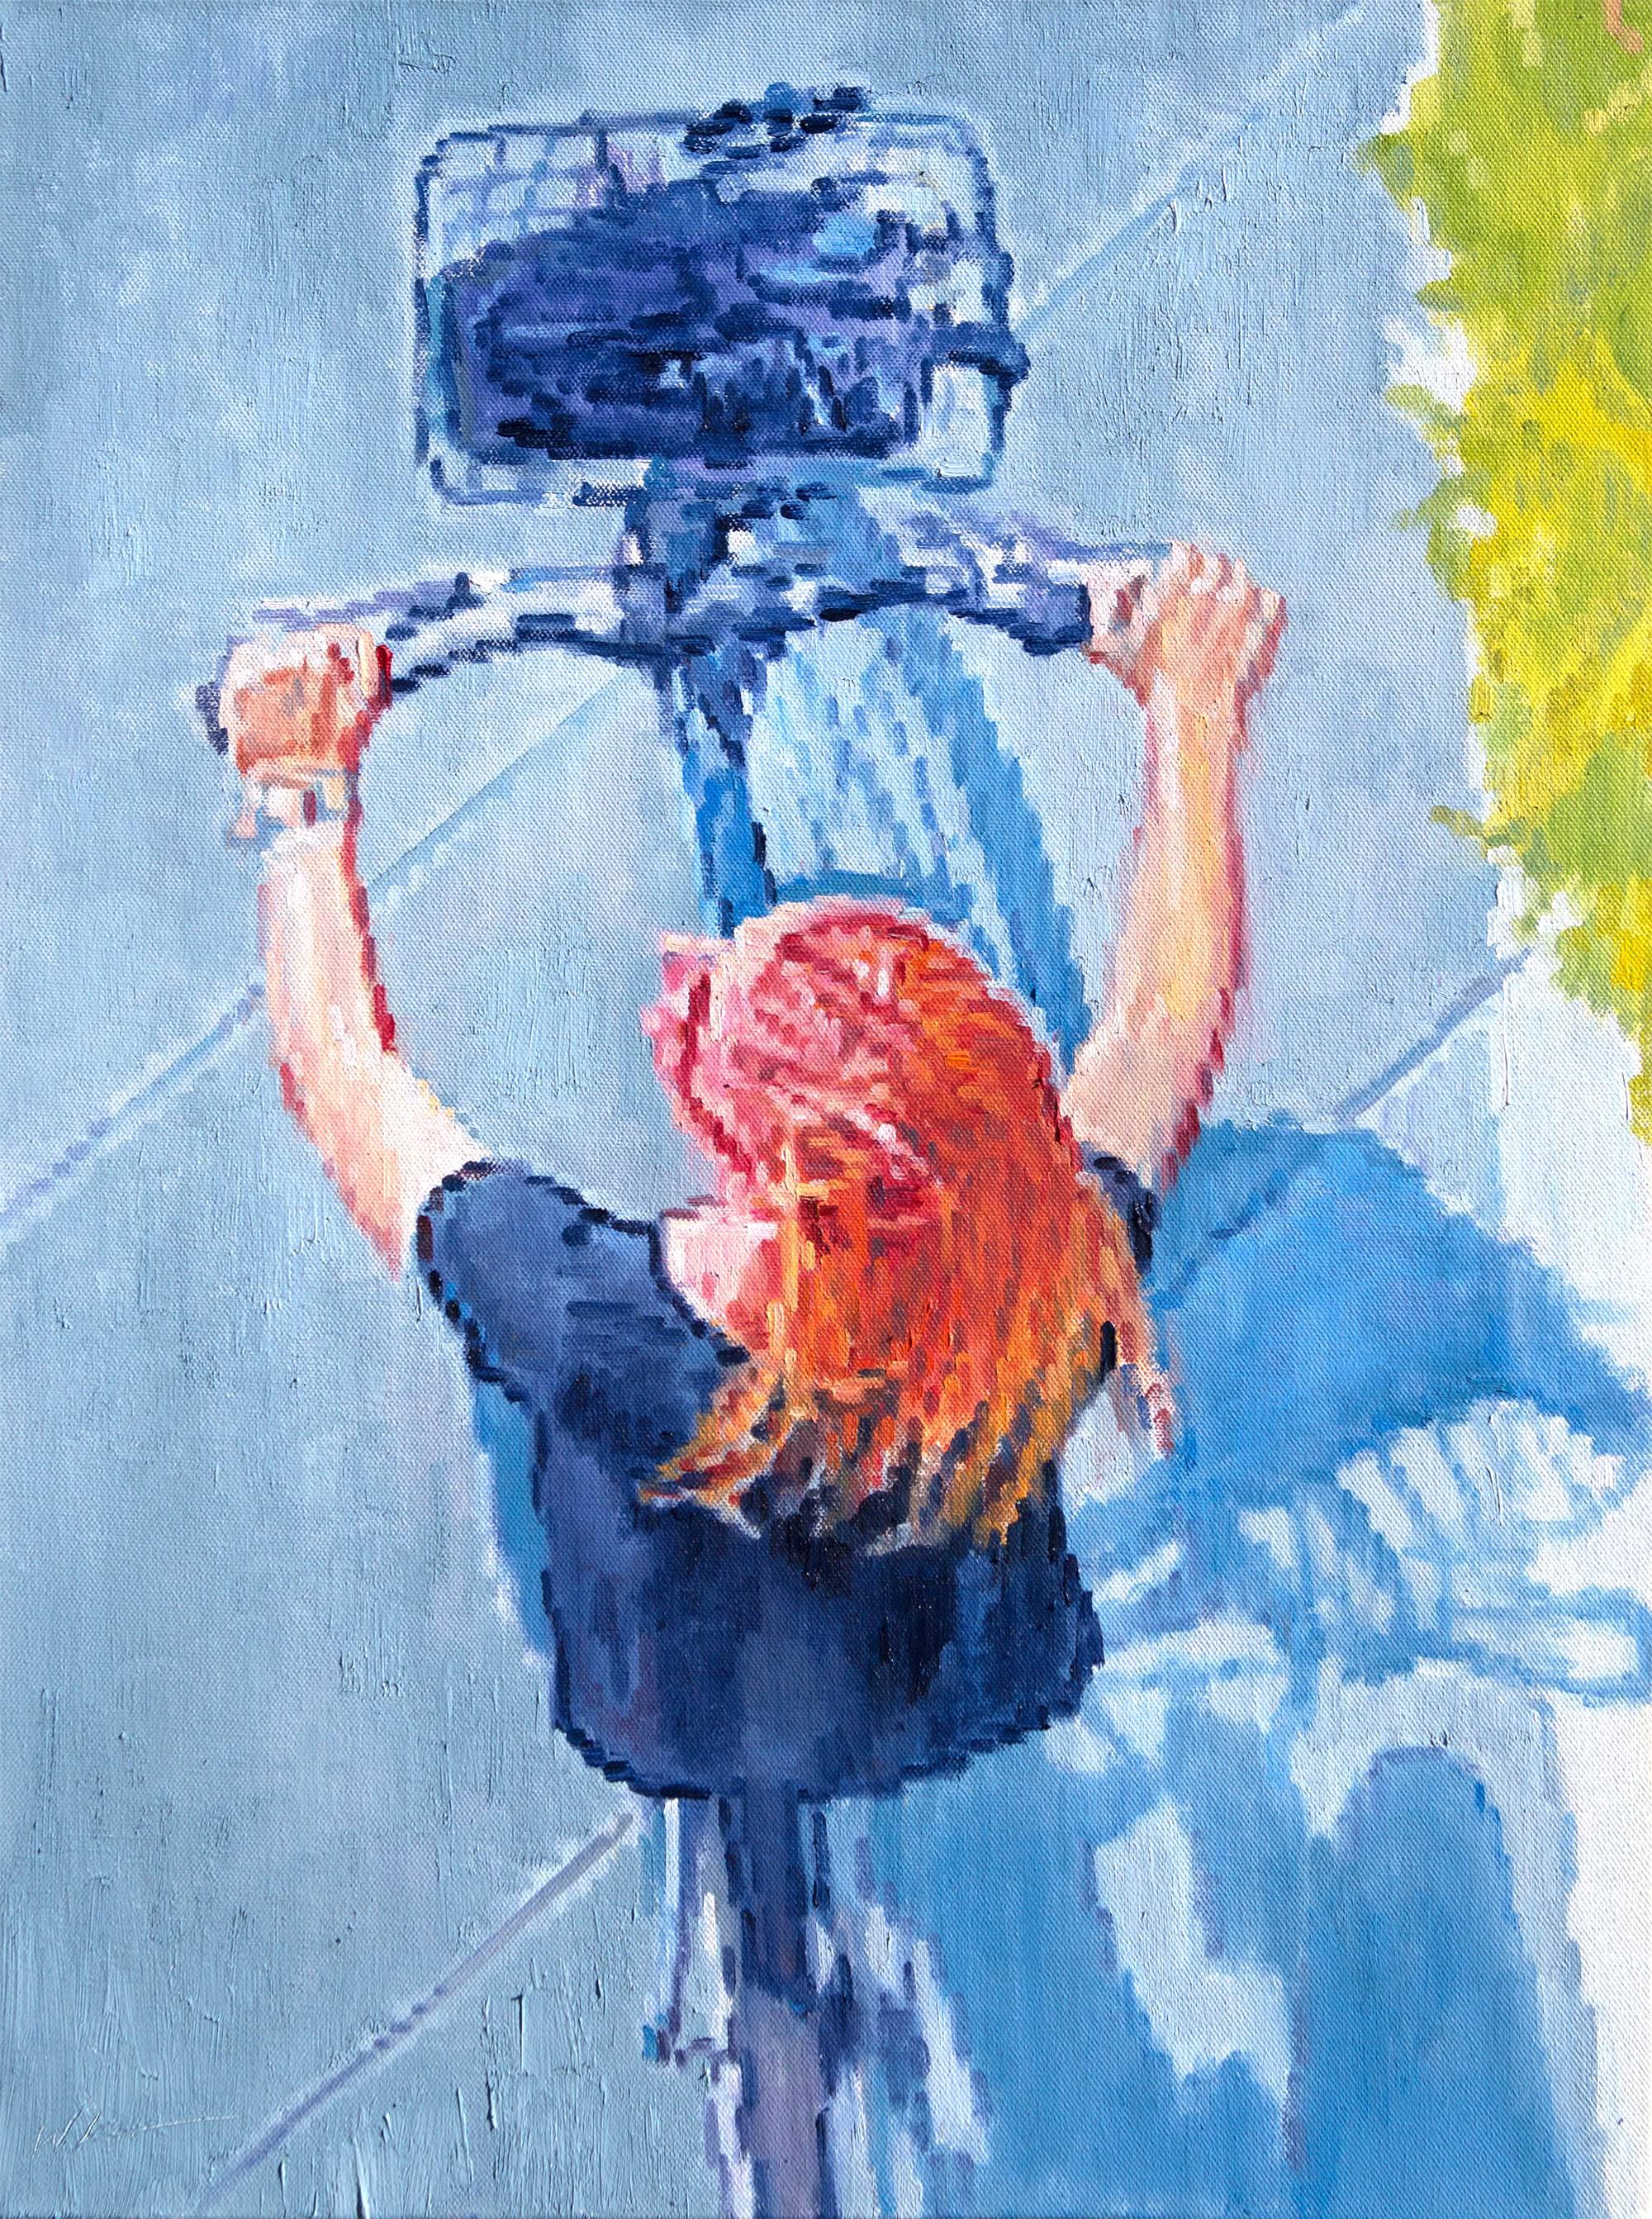 Warren Keating Figurative Painting - Aerial View of Strawberry Blonde Riding Bicycle